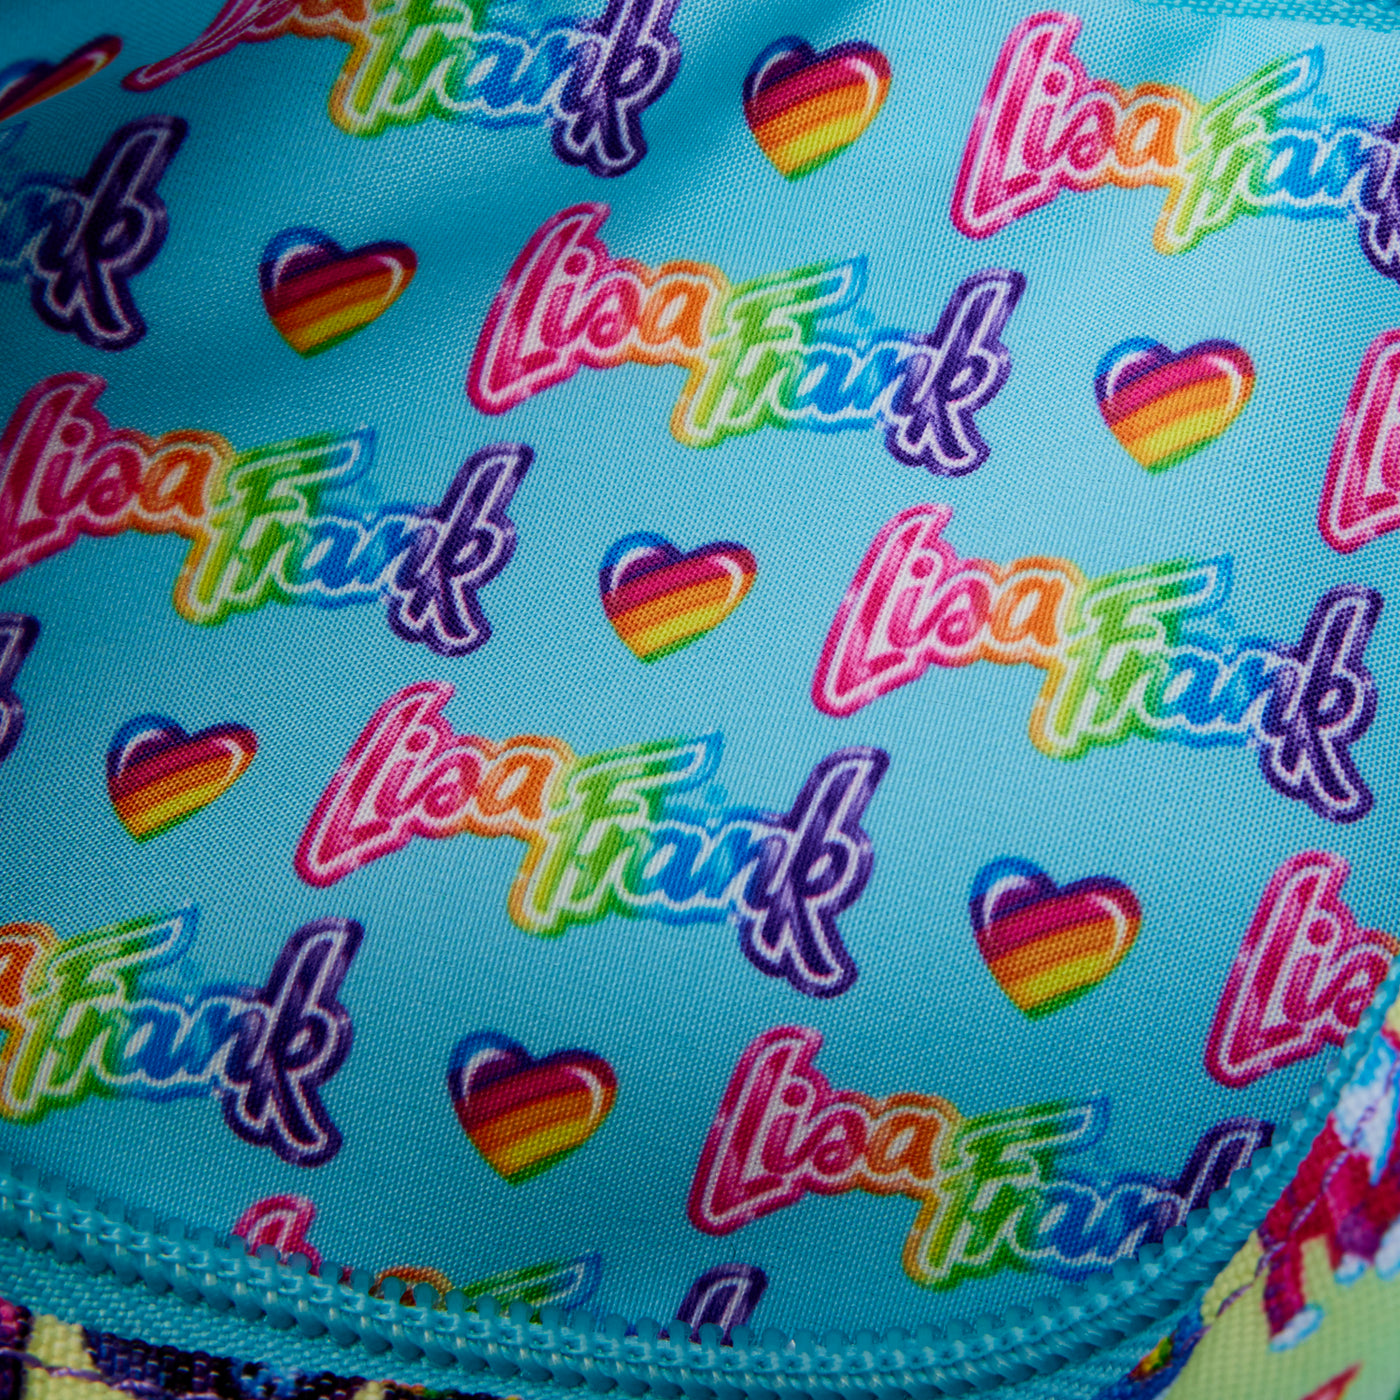 Lisa Frank Characters AOP Pouch